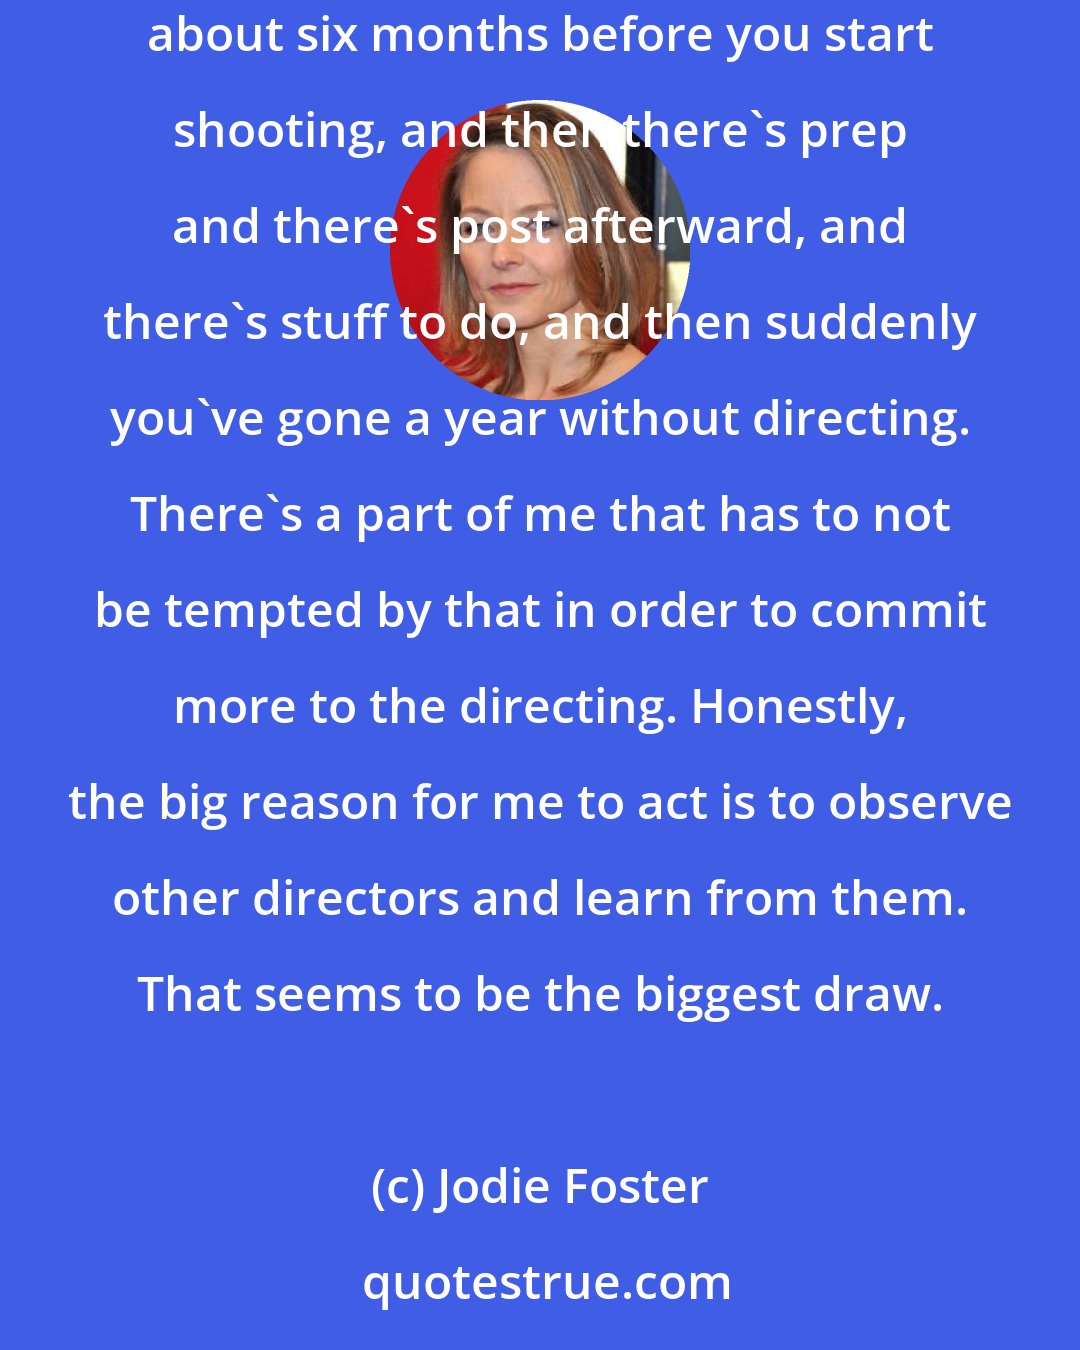 Jodie Foster: I'd like to work more as a director. It's distracting being an actor, because - there's a lot of reasons. You find out you're going to work about six months before you start shooting, and then there's prep and there's post afterward, and there's stuff to do, and then suddenly you've gone a year without directing. There's a part of me that has to not be tempted by that in order to commit more to the directing. Honestly, the big reason for me to act is to observe other directors and learn from them. That seems to be the biggest draw.